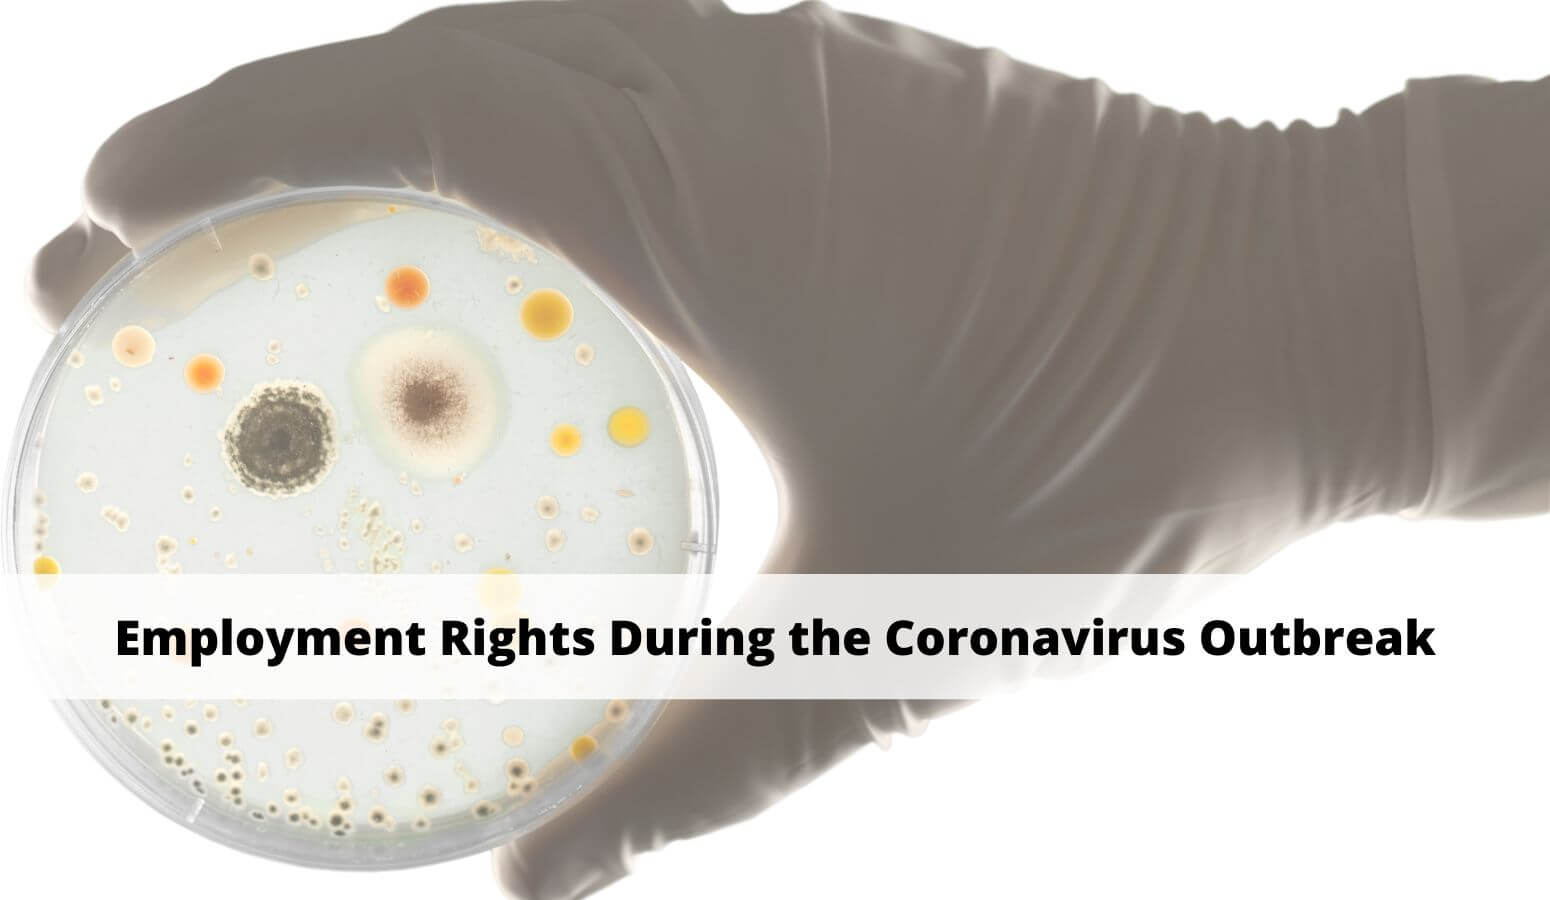 Featured image for “Employment Rights During the Coronavirus Outbreak”